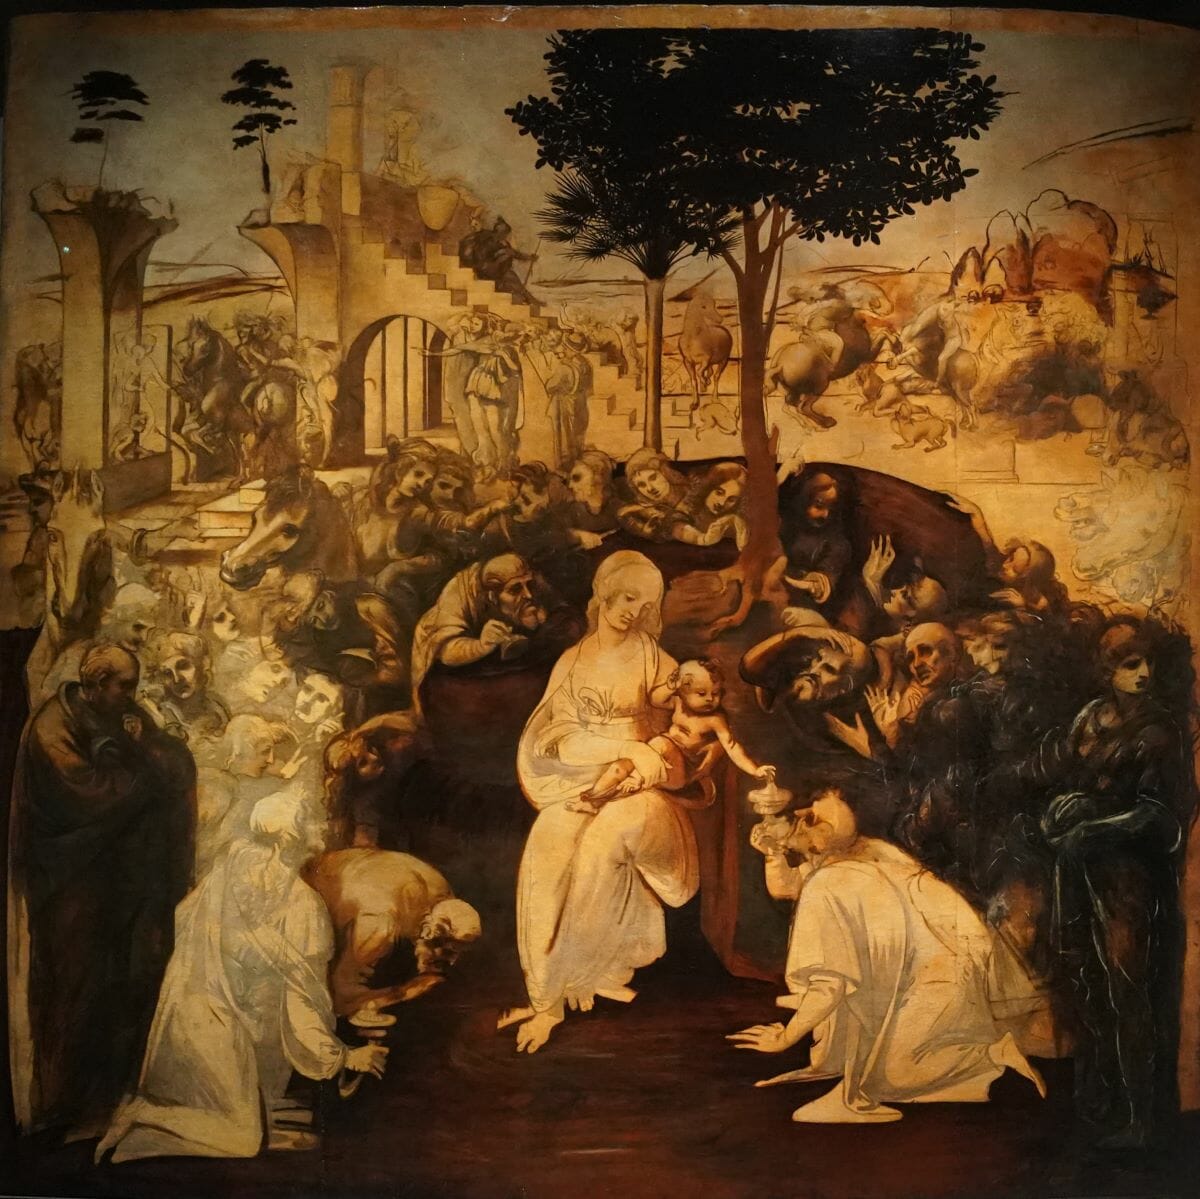 Painting The Adoration of the Magi